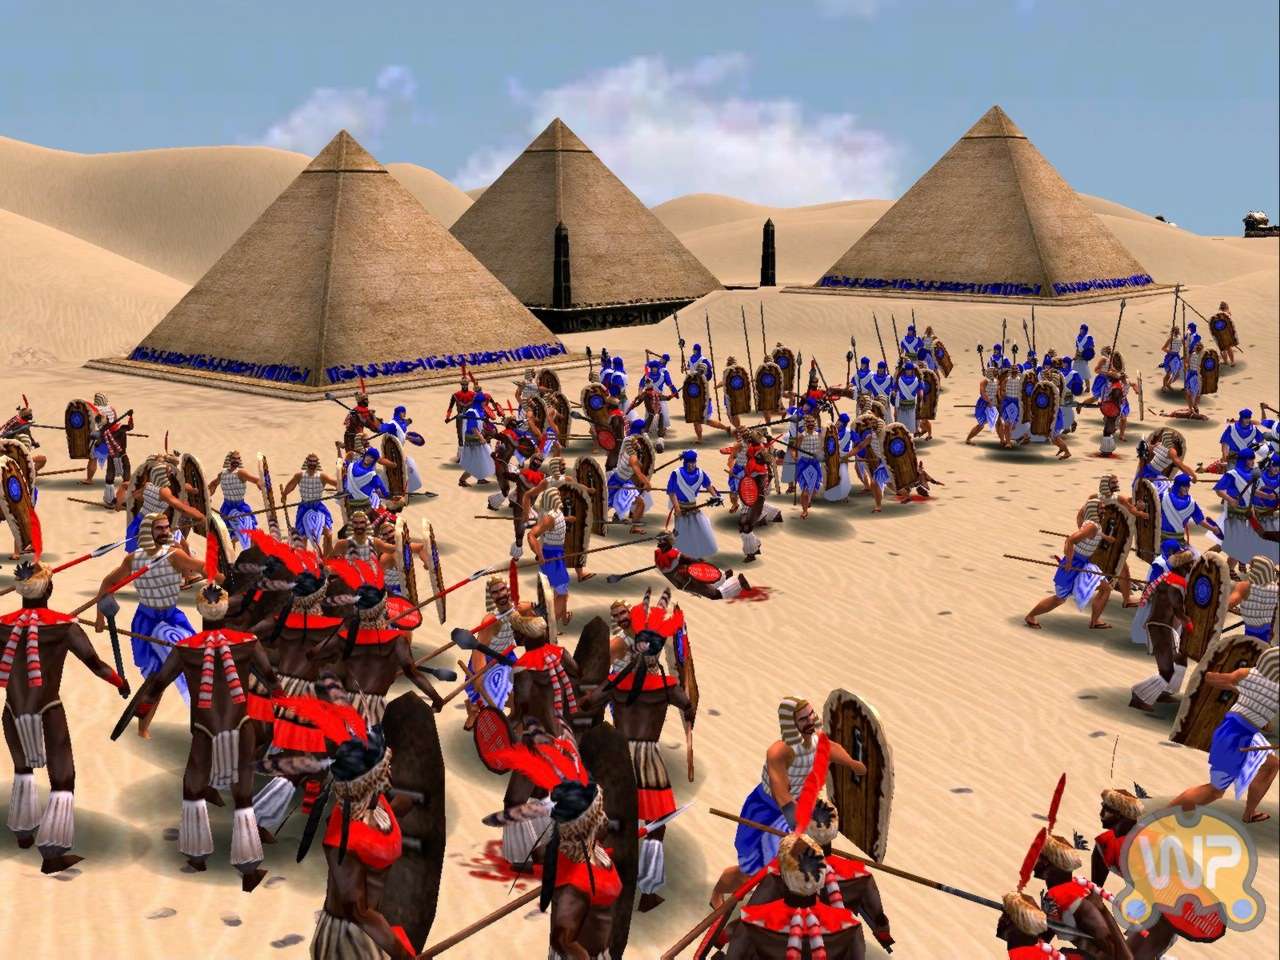 empire earth 2 art of supremacy download